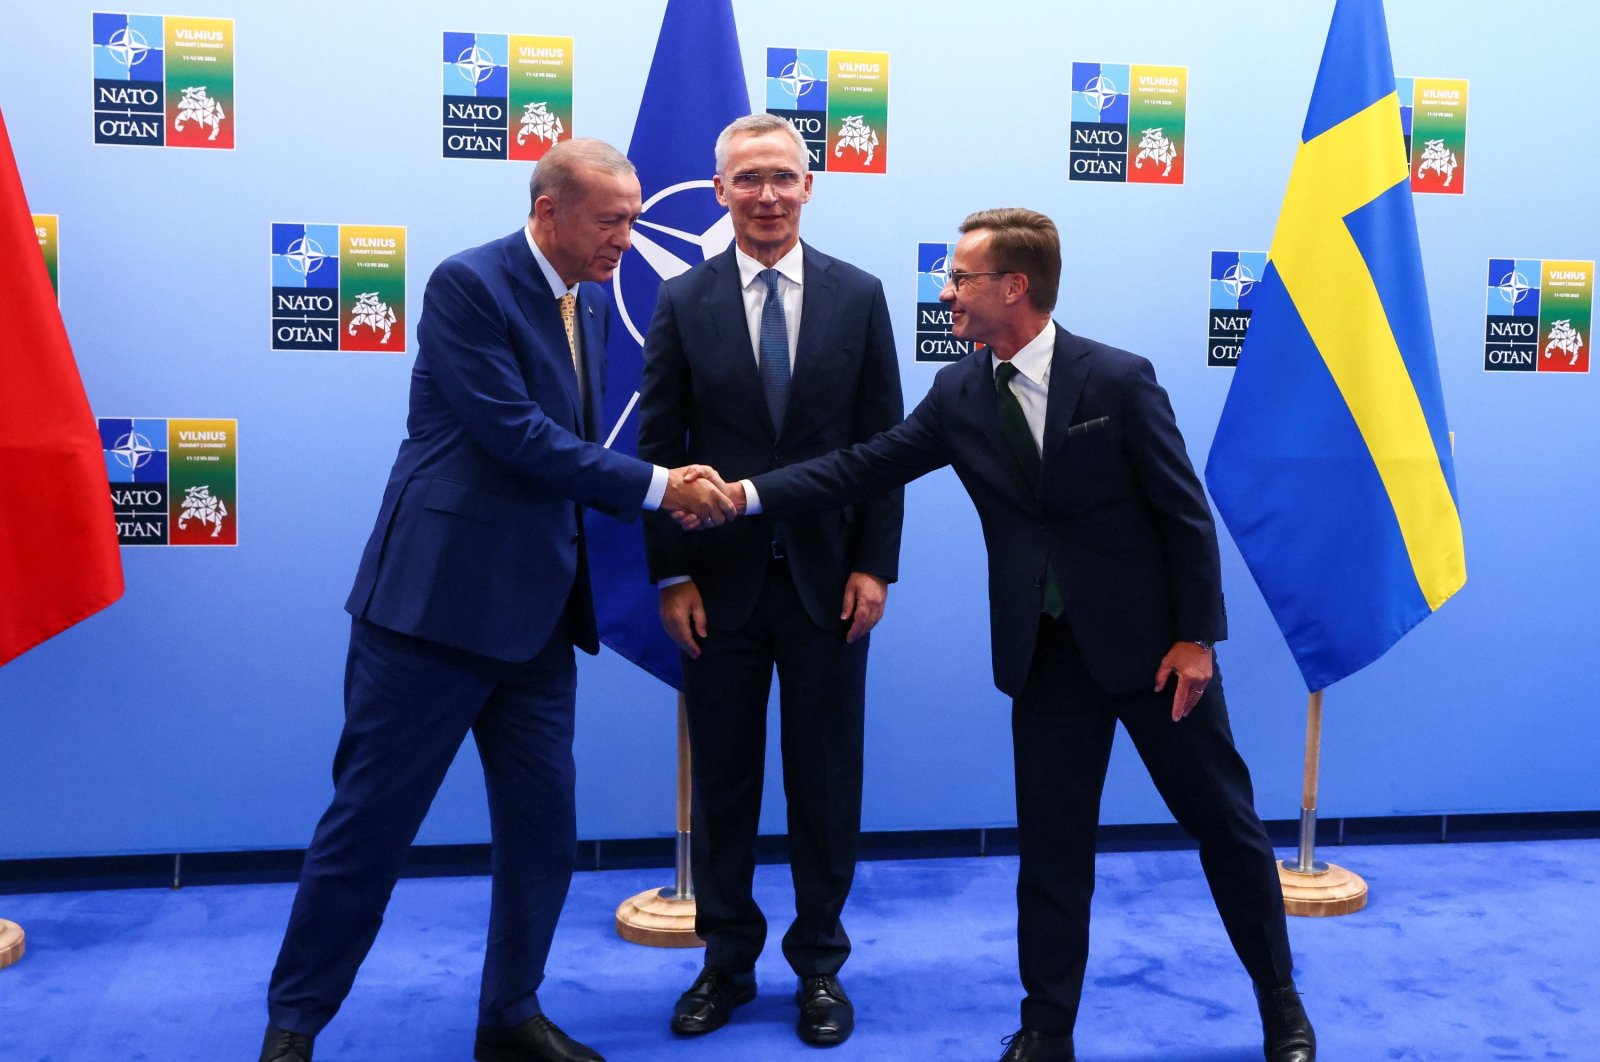 President Tayyip Erdoğan and Swedish Prime Minister Ulf Kristersson (R) shake hands next to NATO Secretary-General Jens Stoltenberg (C) prior to their meeting, on the eve of a NATO summit, in Vilnius, Lithuania, July 10, 2023. (Reuters Photo)